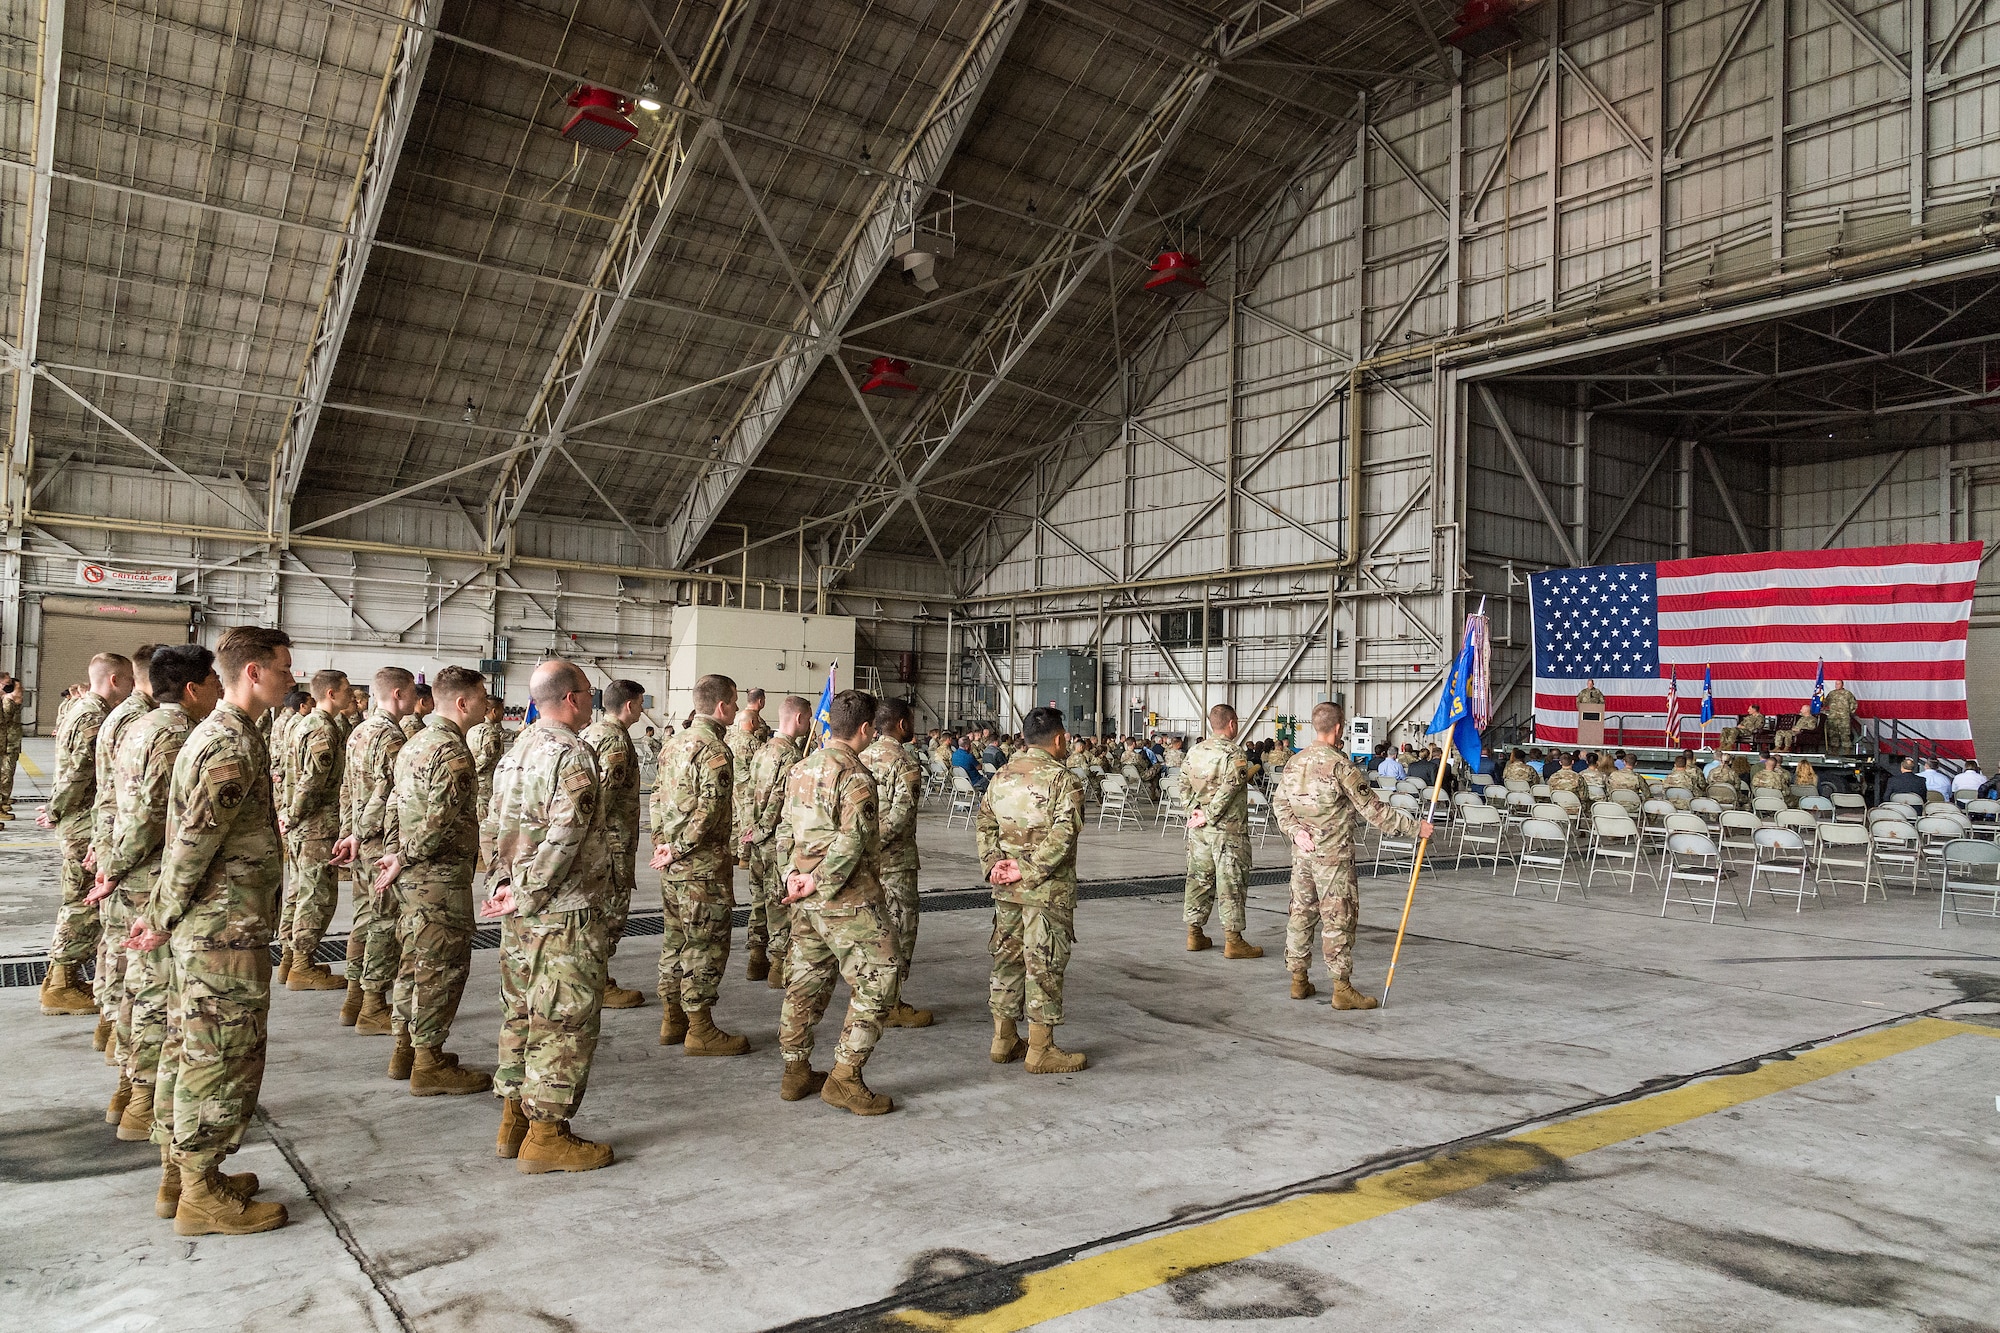 Personnel from the 436th Maintenance Group stand in formation during the 436th MXG Change of Command ceremony on Dover Air Force Base, Delaware, June 11, 2021. Col. Christopher May relinquished command to Col. Bary Flack in a ceremony officiated by Col. Matt Husemann, 436th Airlift Wing commander. (U.S. Air Force photo by Roland Balik)